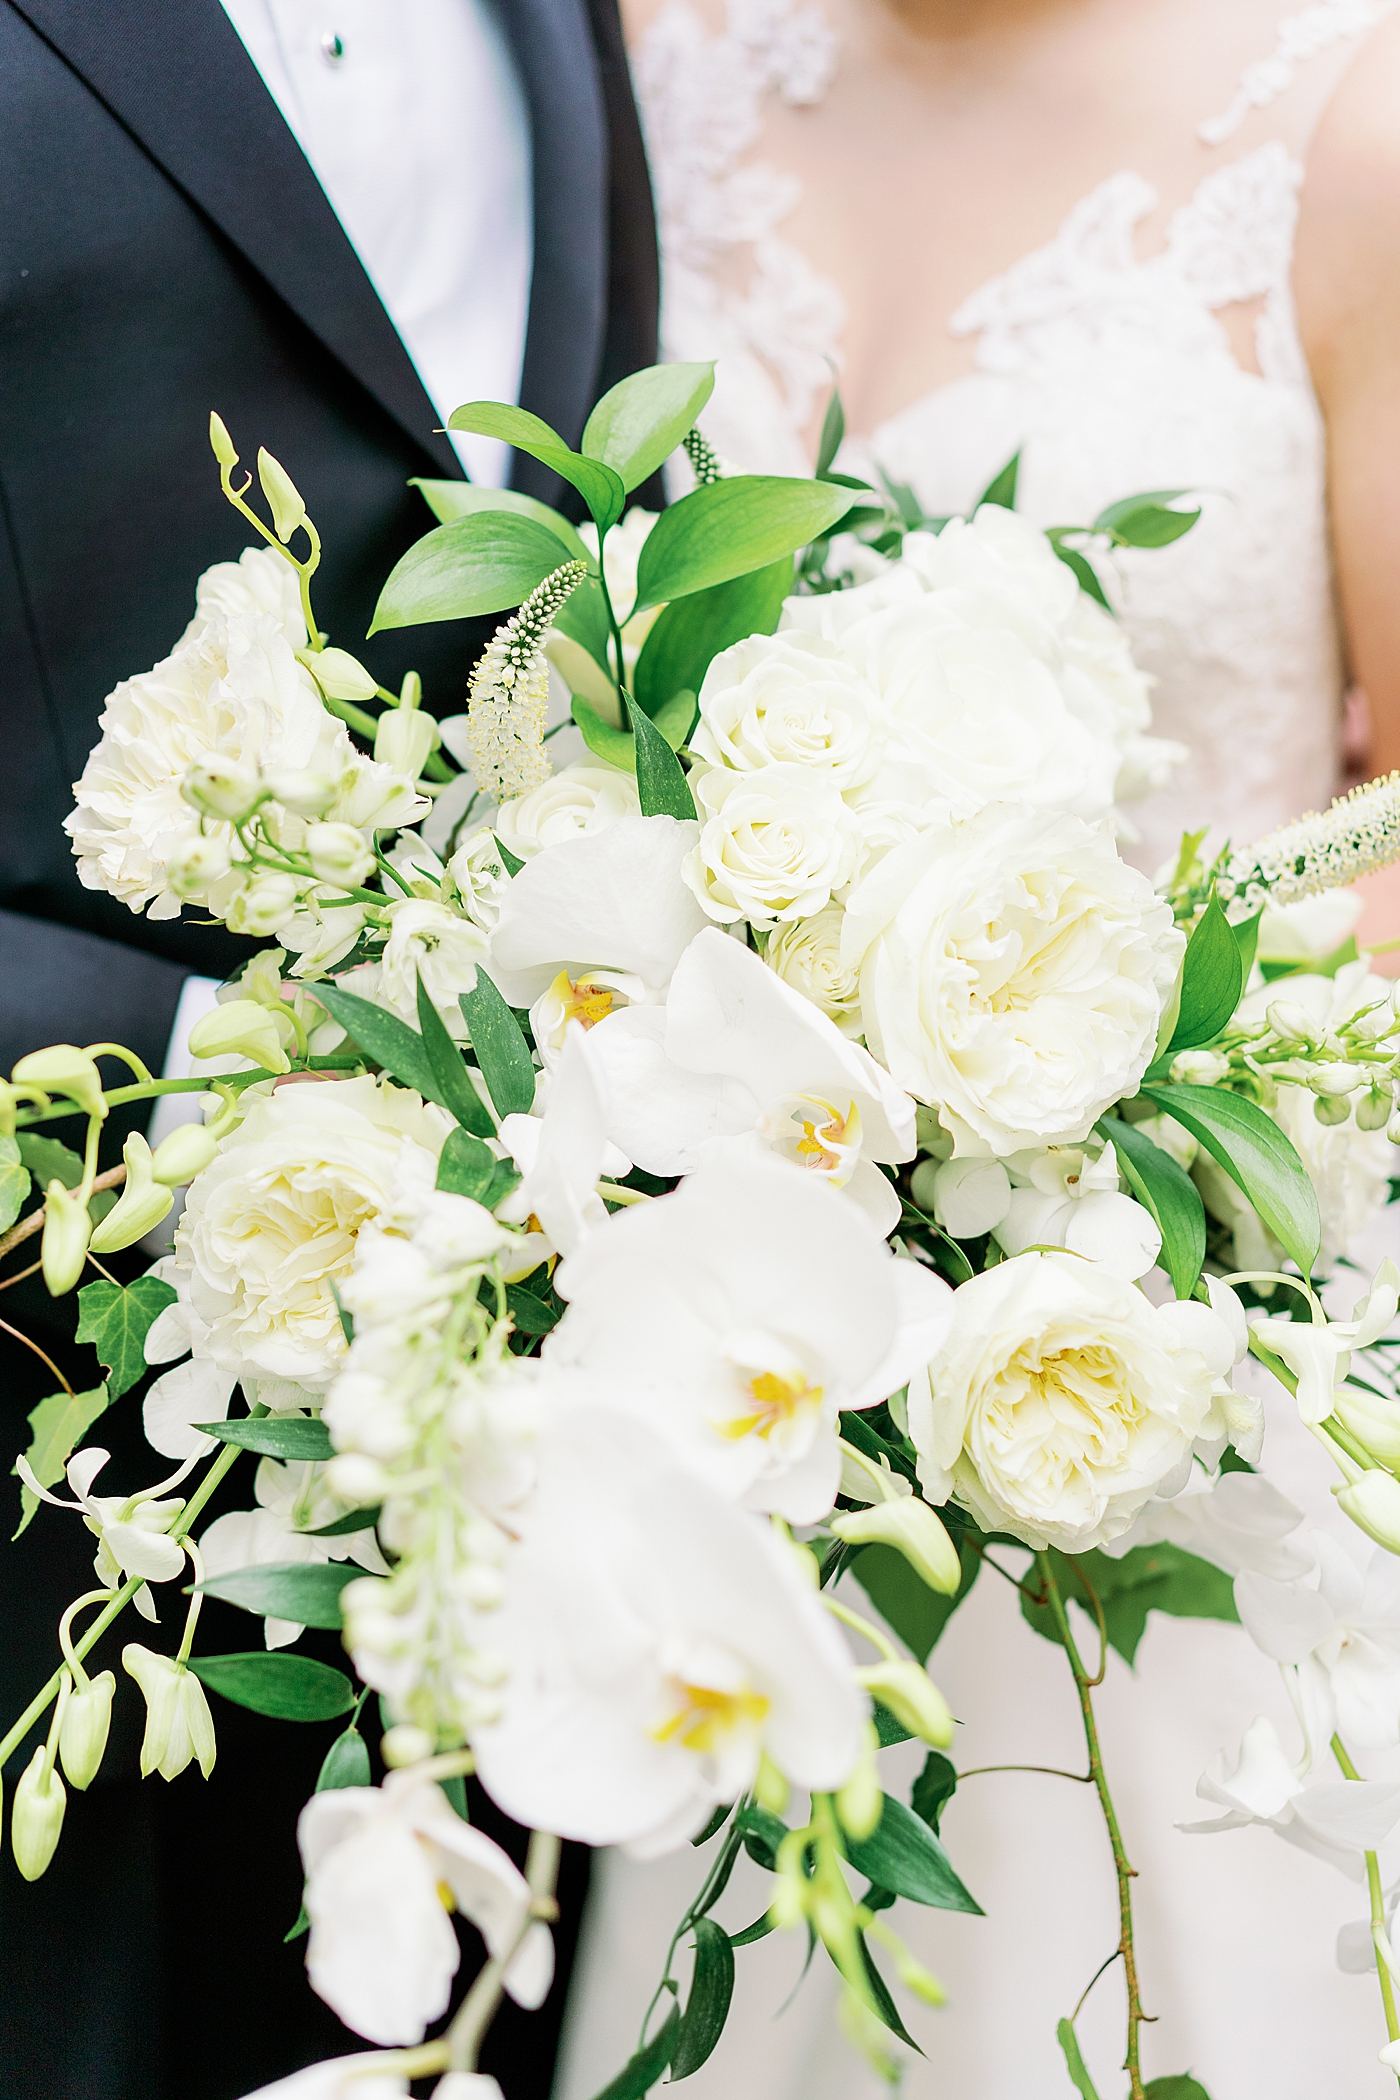 Bridal bouquet with white roses and orchids | Photo by Annie Laura Photography